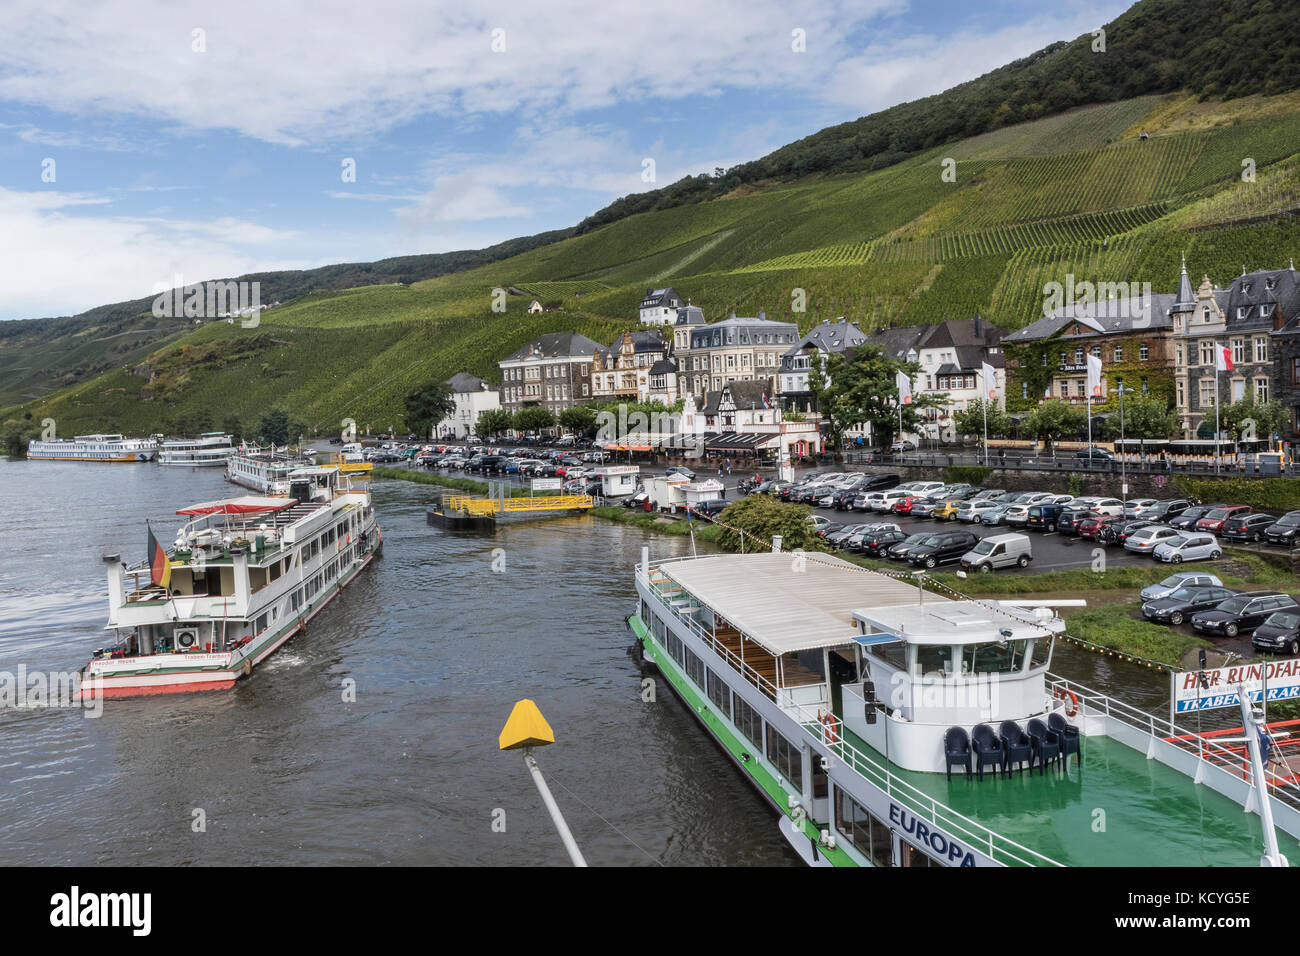 The town of Bernkastel-Kues, in the Mosel Valley, Germany with the passenger boats on the Mosel Riverriverside mooring Stock Photo